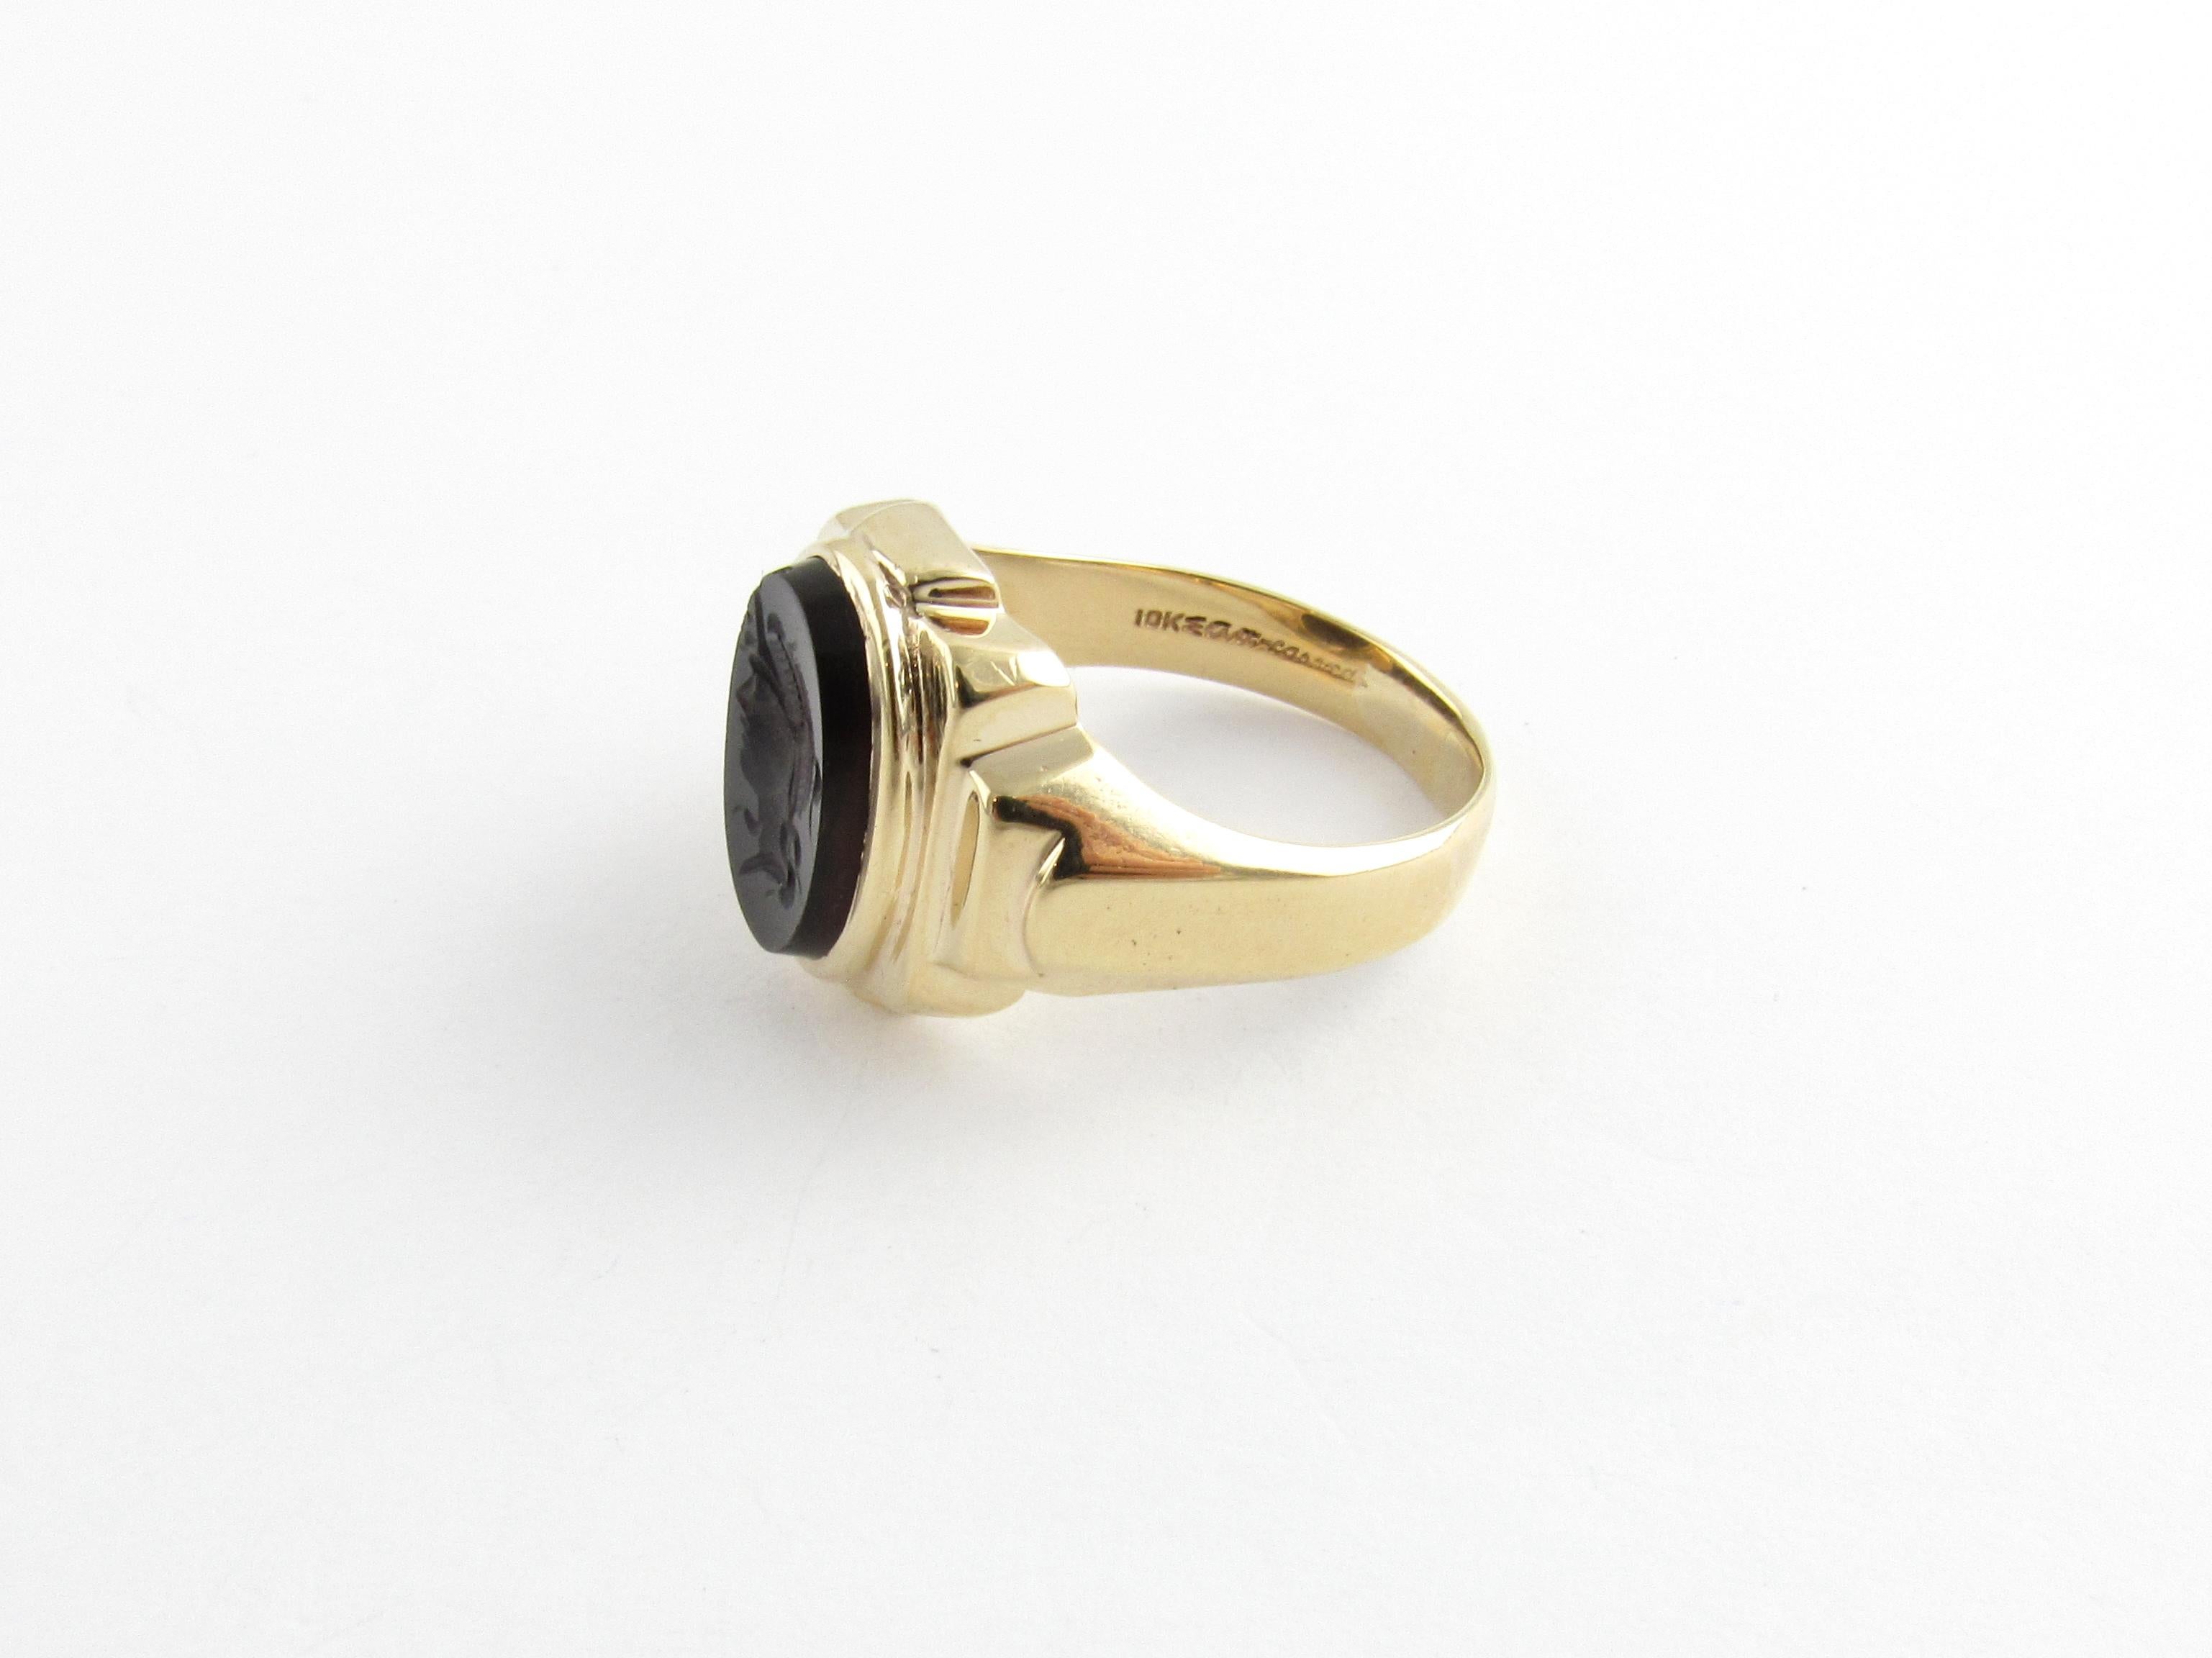 10 Karat Yellow Gold Intaglio Onyx Ring Size 9.5-

This elegant ring features a roman soldier carved in black onyx and set in beautifully detailed 10K yellow gold.  Top of ring measures 16 mm x 15 mm.  Shank measures 3.5 mm.

Ring Size:  9.5